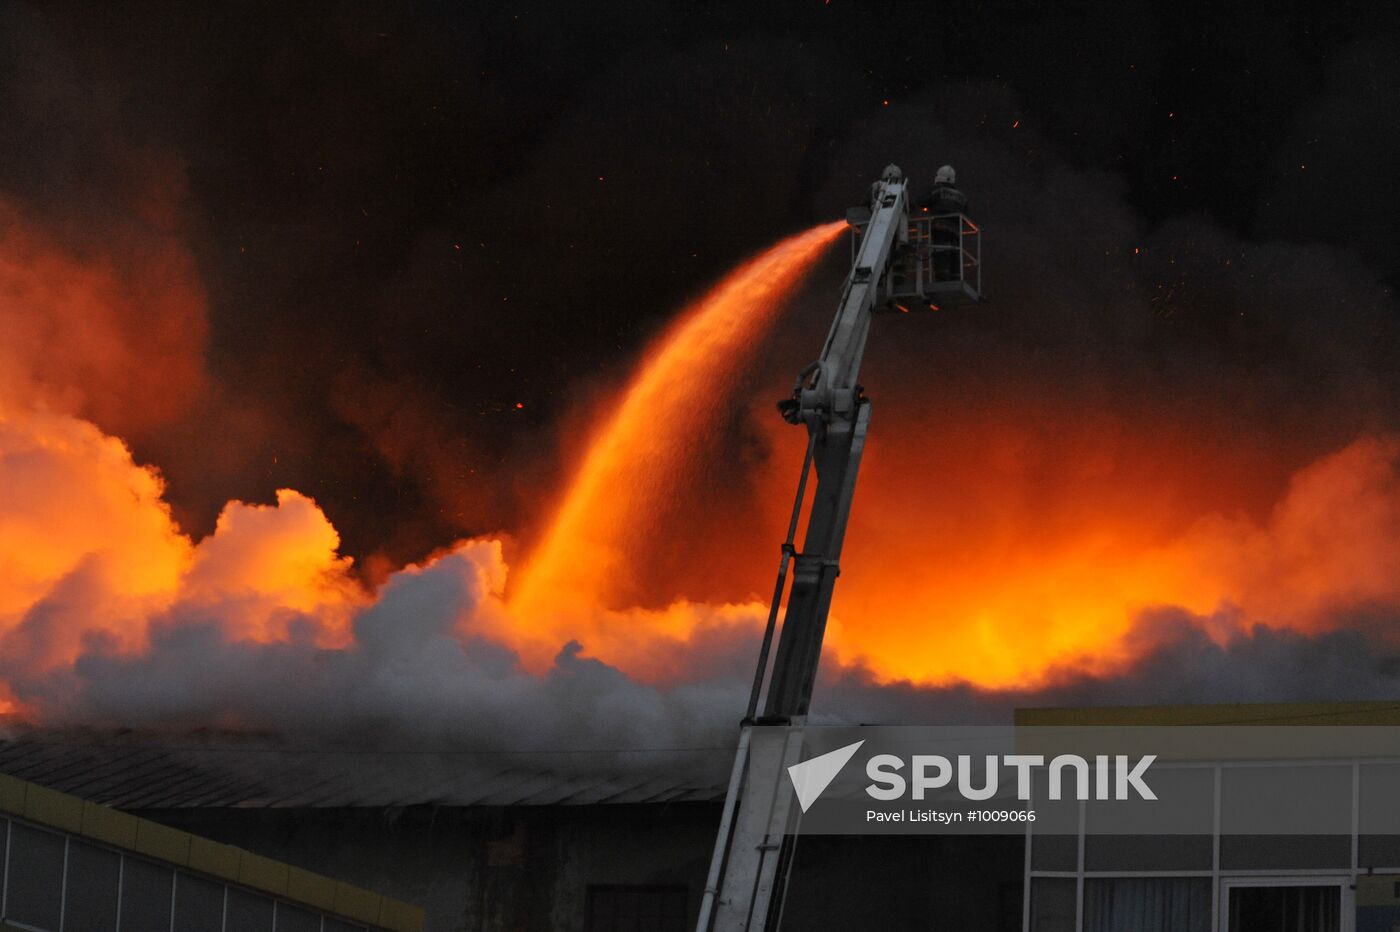 Clothing warehouse in Yekaterinburg on fire